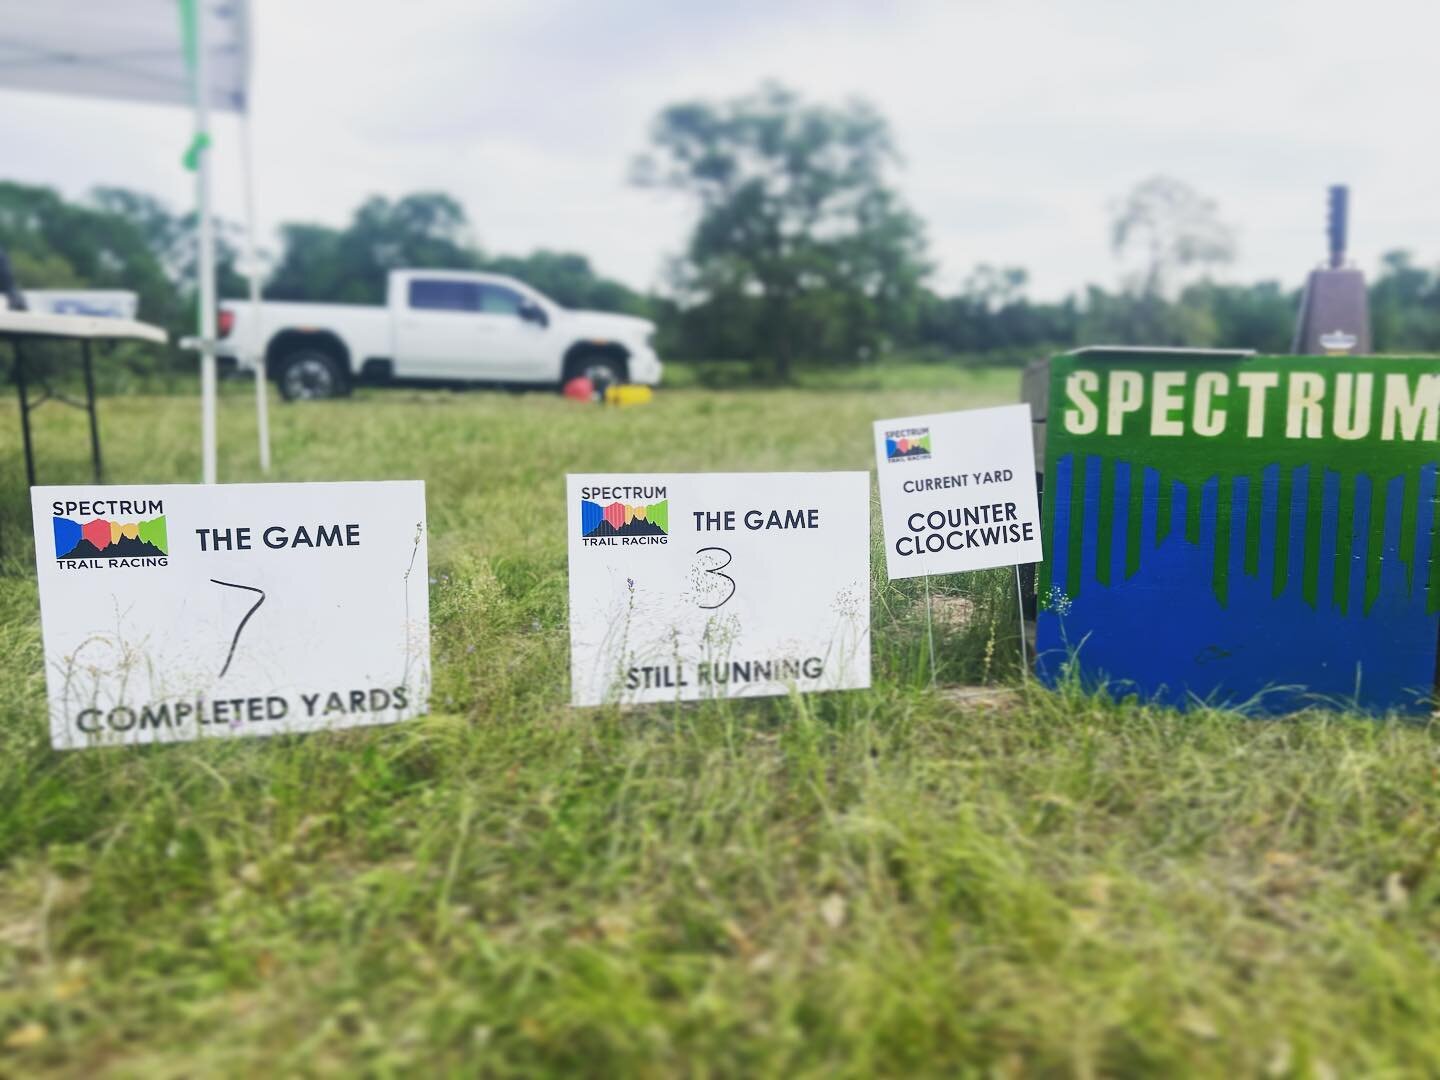 And then there were 3&hellip;

We have 3 runners out on the course for their 8th yard. 

Total miles completed: 29.19 

#thegame #spectrumtrailracing